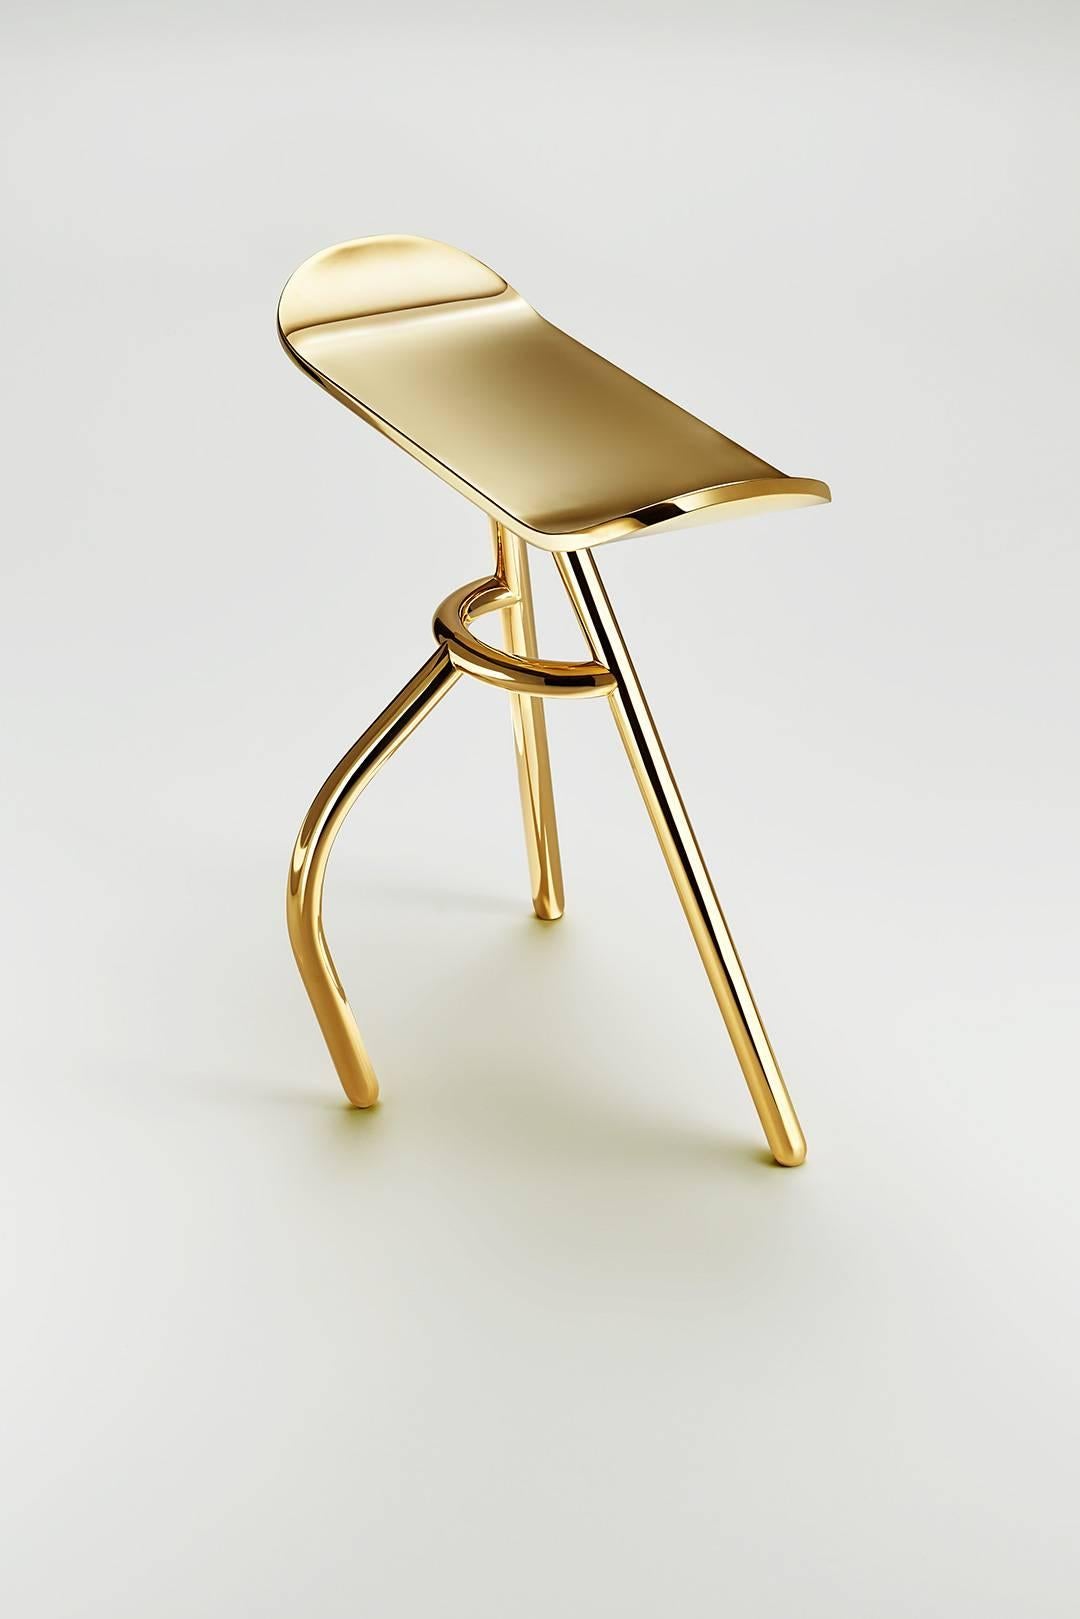 The stool is a standing stool made of brass designed by Kossi Aguessy, made in France, different finishes available.